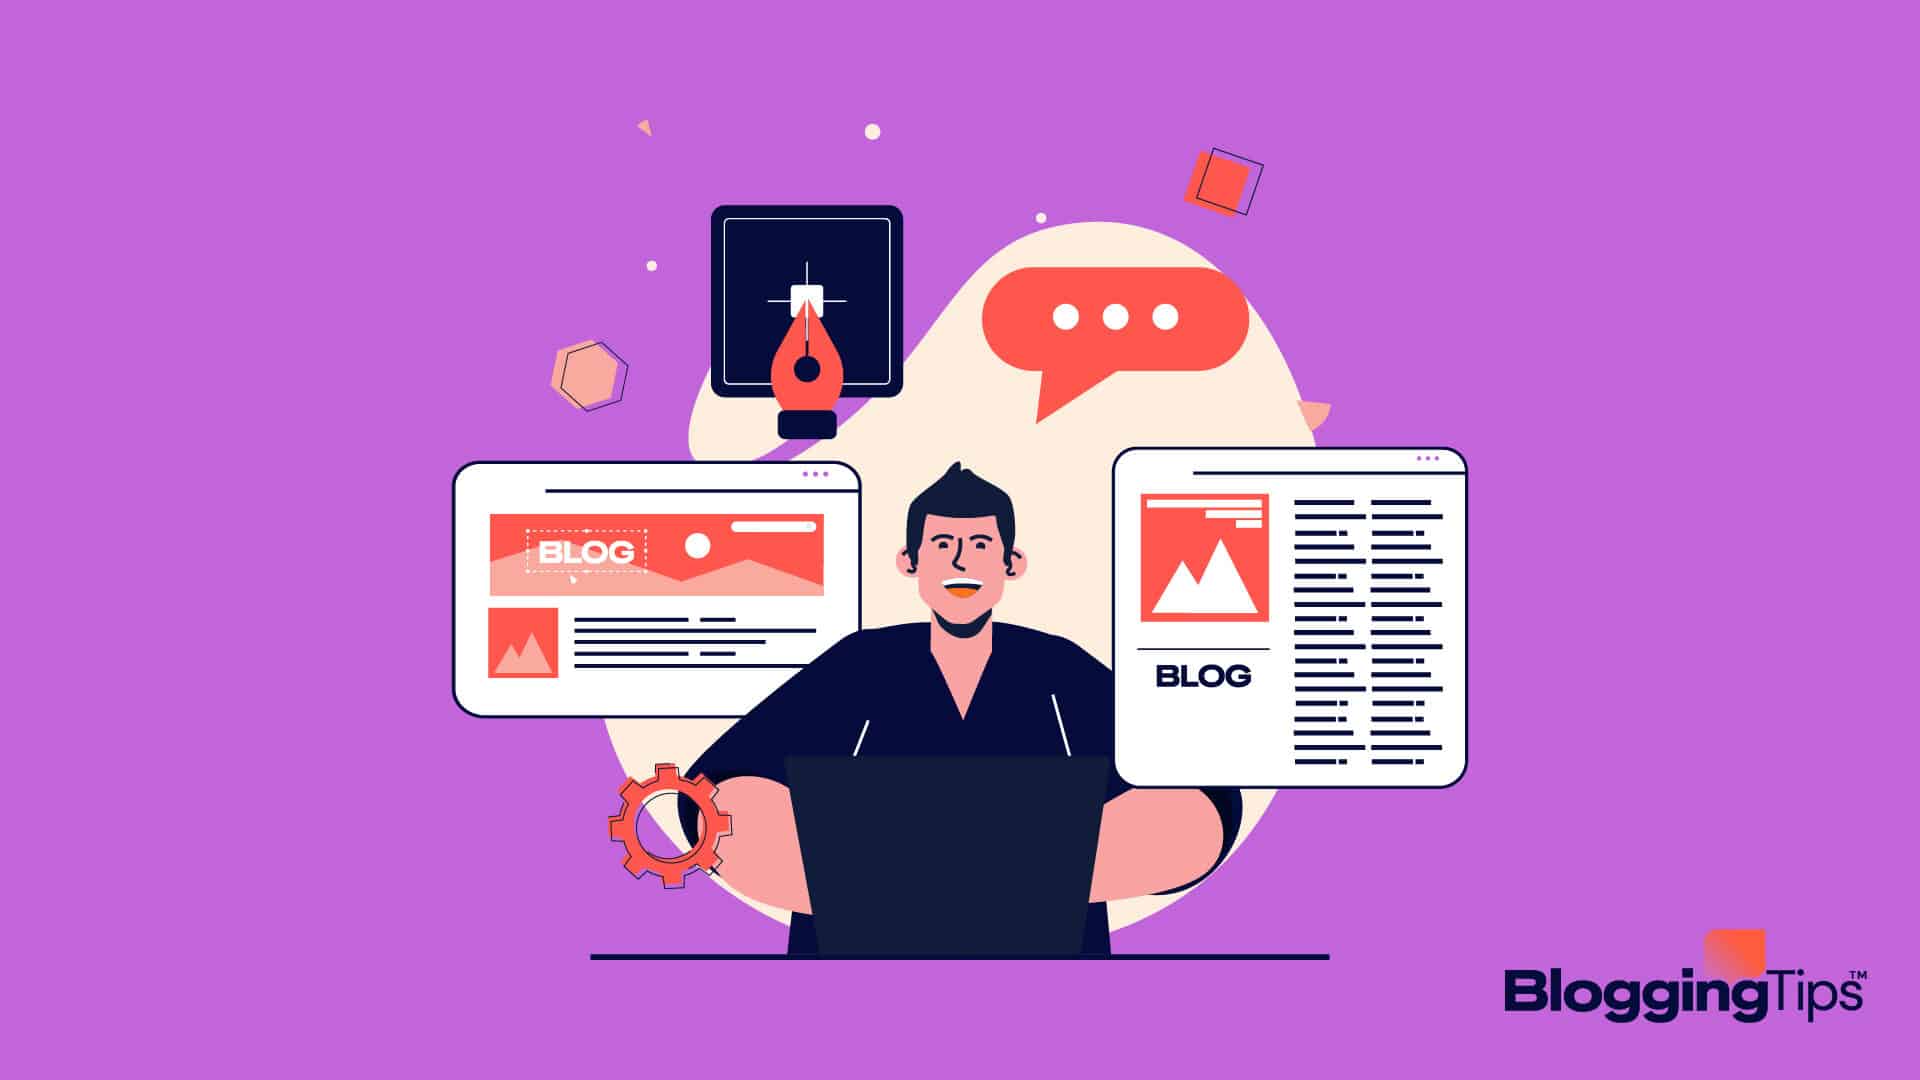 vector graphic showing an illustration of a man surrounded by graphics that are related to blog taglines